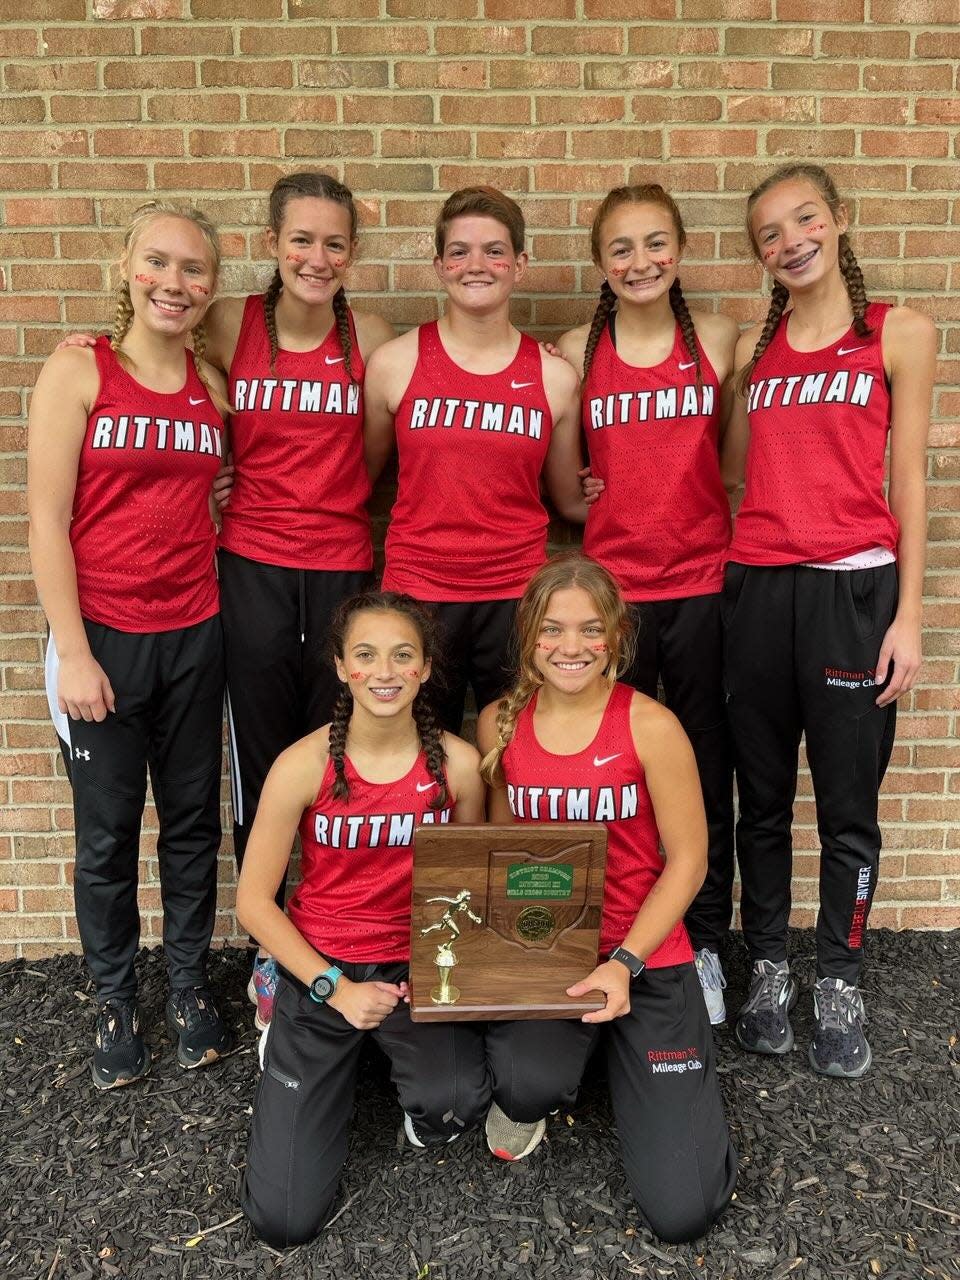 Rittman's girls cross country team, pictured here after their district title win, finished runner-up at the state meet despite most of the team consisting of freshmen and sophomores.